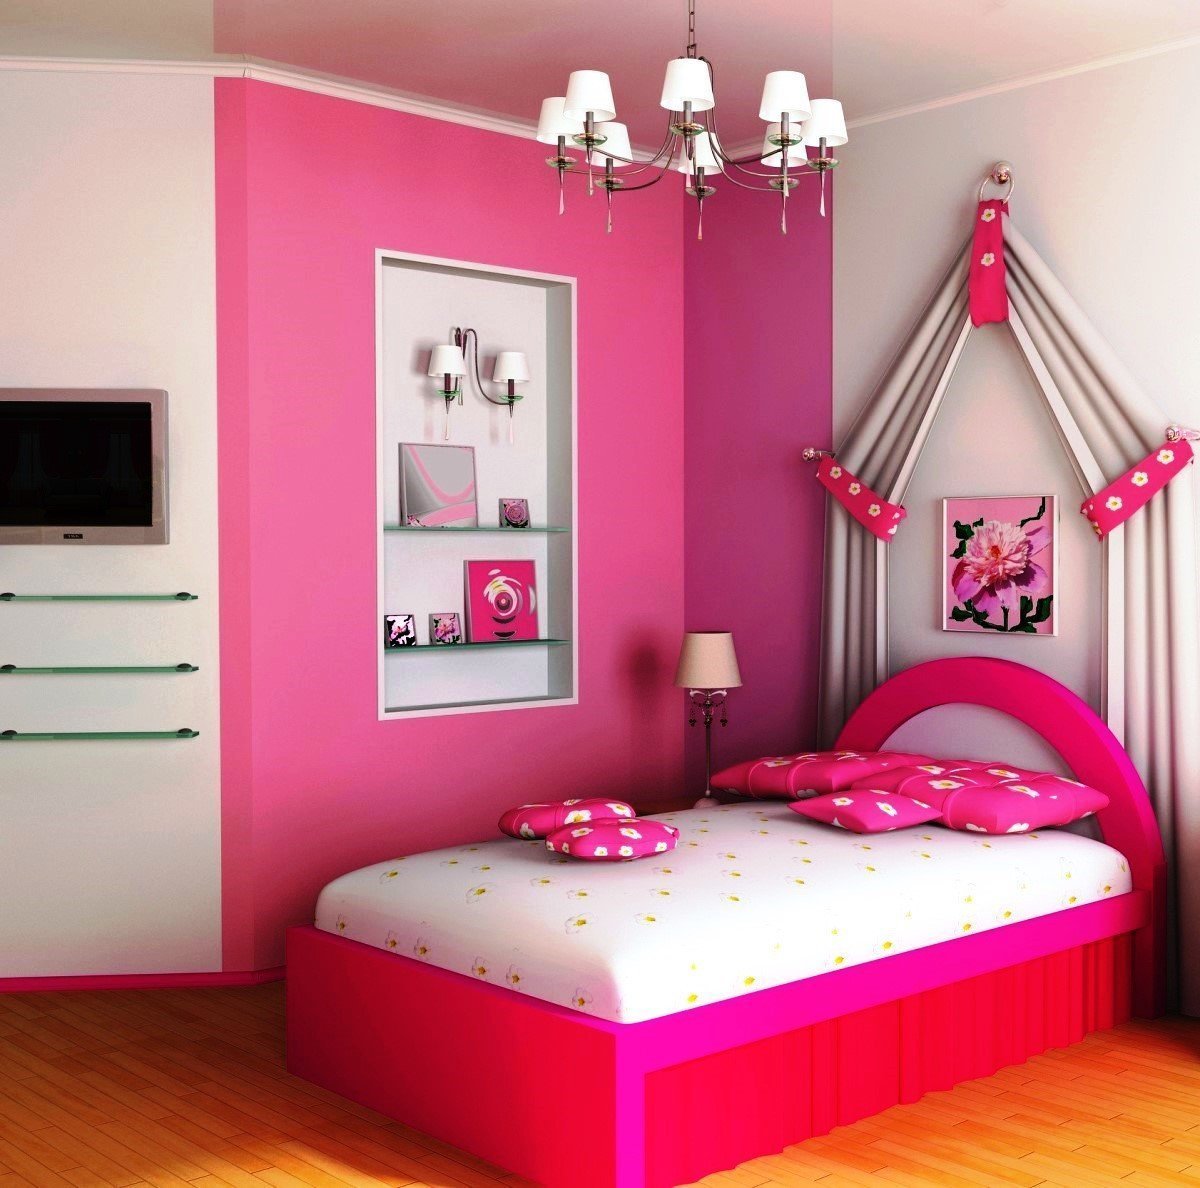 HOG how to decorate the dream room of a teenage girl